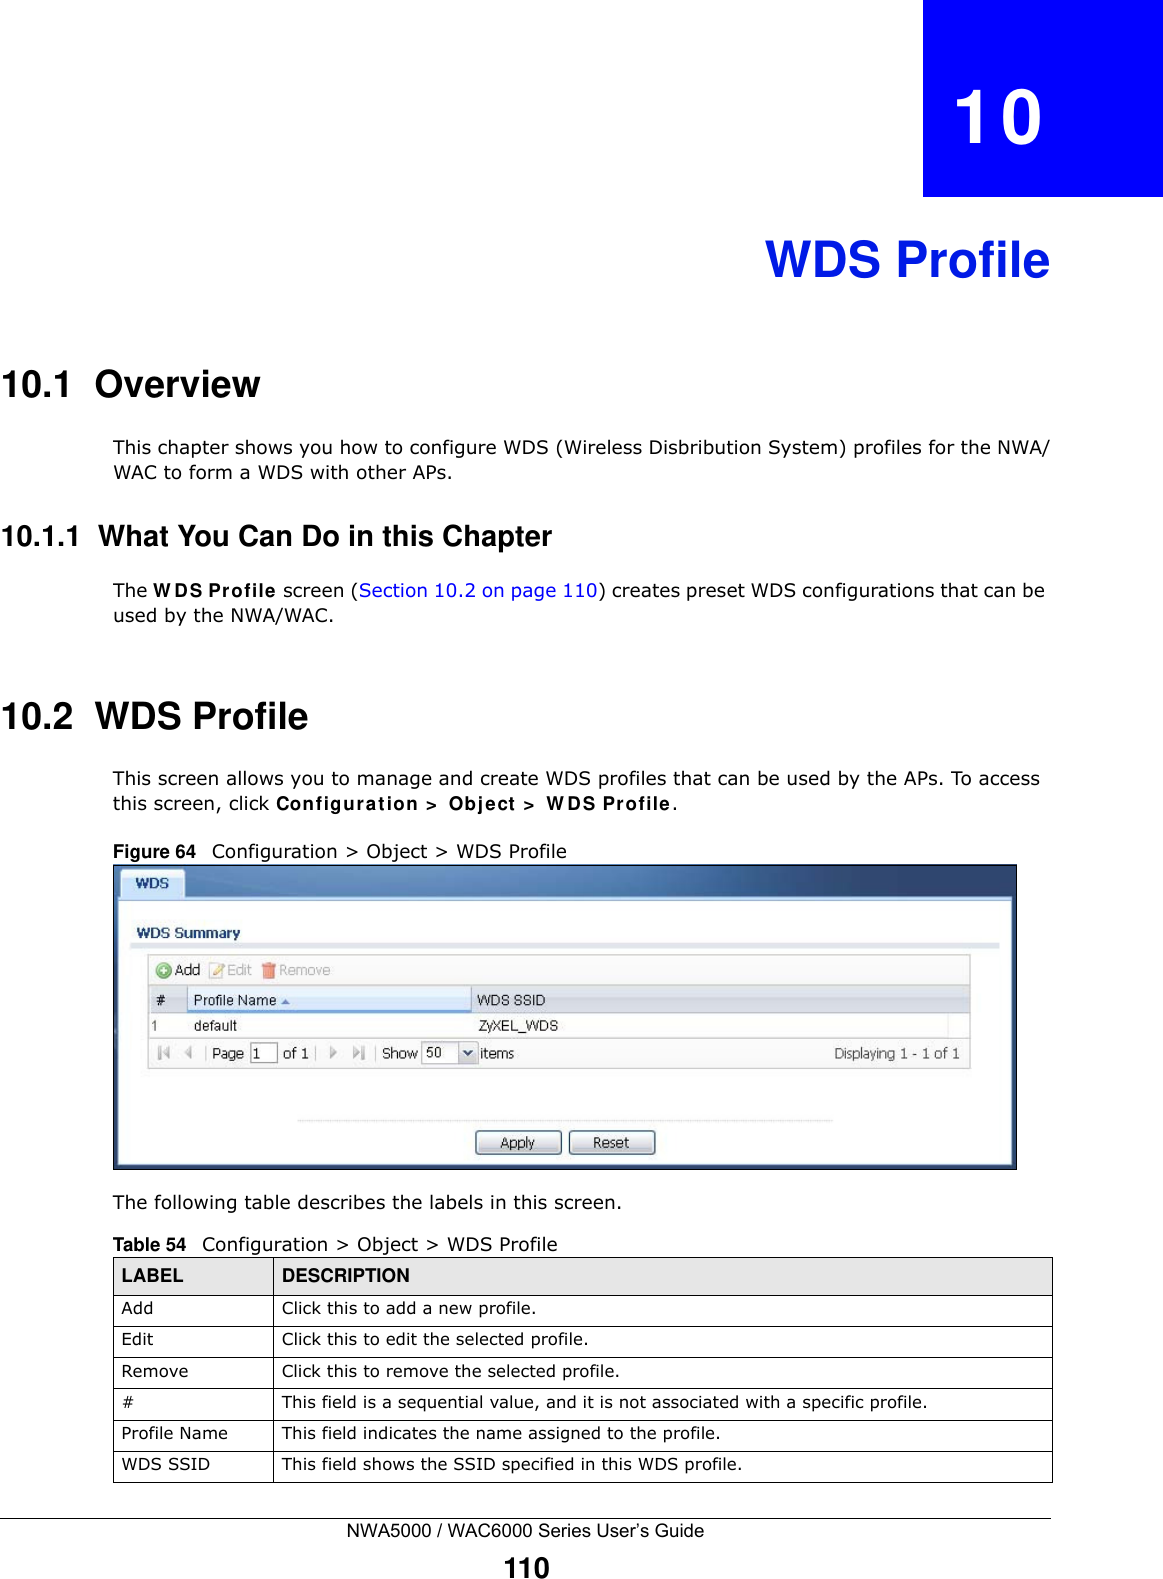 NWA5000 / WAC6000 Series User’s Guide110CHAPTER   10WDS Profile10.1  OverviewThis chapter shows you how to configure WDS (Wireless Disbribution System) profiles for the NWA/WAC to form a WDS with other APs.10.1.1  What You Can Do in this ChapterThe W DS Profile screen (Section 10.2 on page 110) creates preset WDS configurations that can be used by the NWA/WAC.10.2  WDS Profile This screen allows you to manage and create WDS profiles that can be used by the APs. To access this screen, click Configurat ion  &gt;  Object  &gt;  W DS Profile.Figure 64   Configuration &gt; Object &gt; WDS ProfileThe following table describes the labels in this screen.  Table 54   Configuration &gt; Object &gt; WDS ProfileLABEL DESCRIPTIONAdd Click this to add a new profile.Edit Click this to edit the selected profile.Remove Click this to remove the selected profile.# This field is a sequential value, and it is not associated with a specific profile.Profile Name This field indicates the name assigned to the profile.WDS SSID This field shows the SSID specified in this WDS profile.